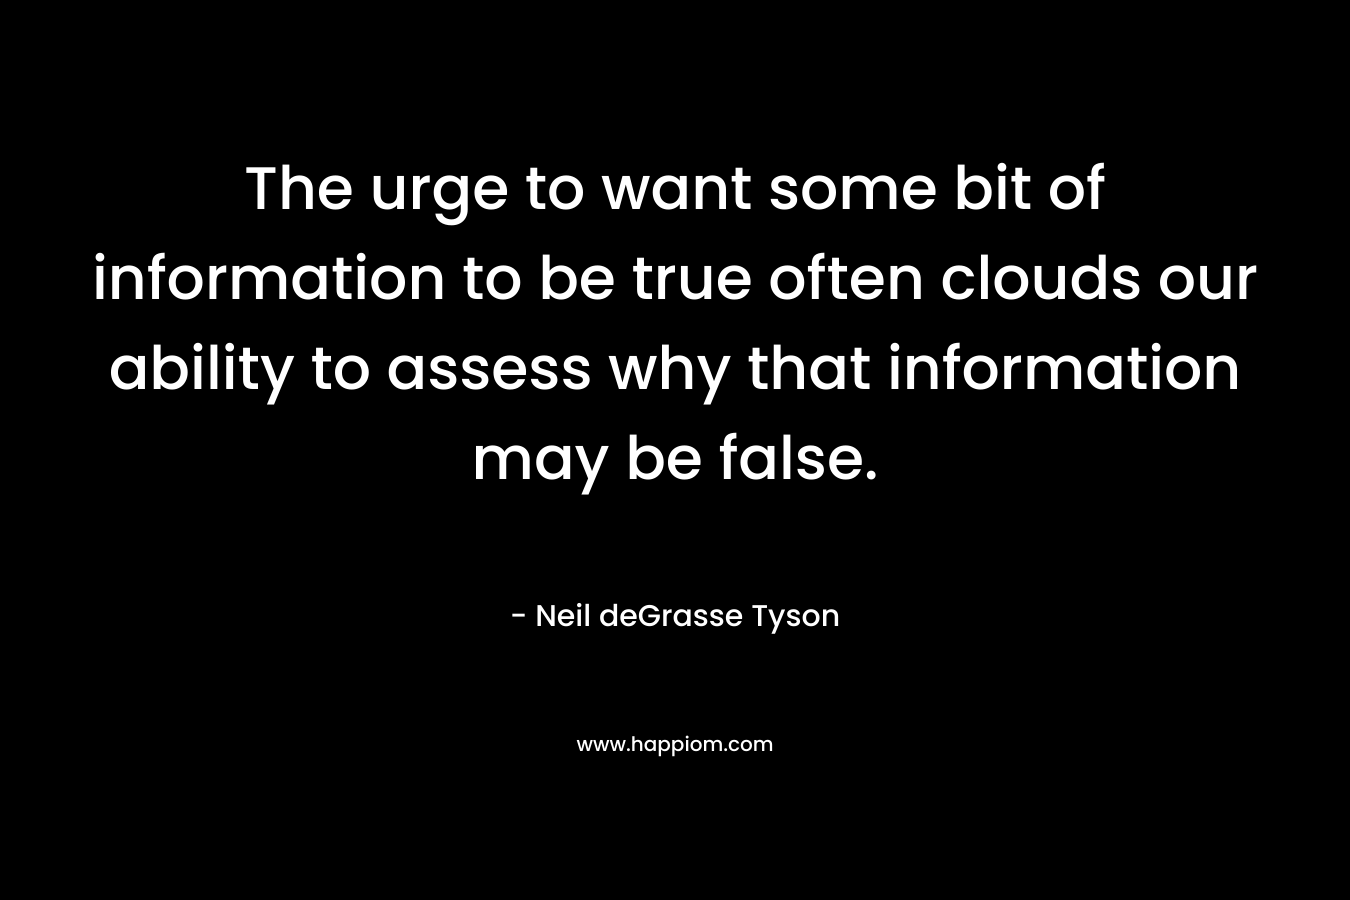 The urge to want some bit of information to be true often clouds our ability to assess why that information may be false. – Neil deGrasse Tyson